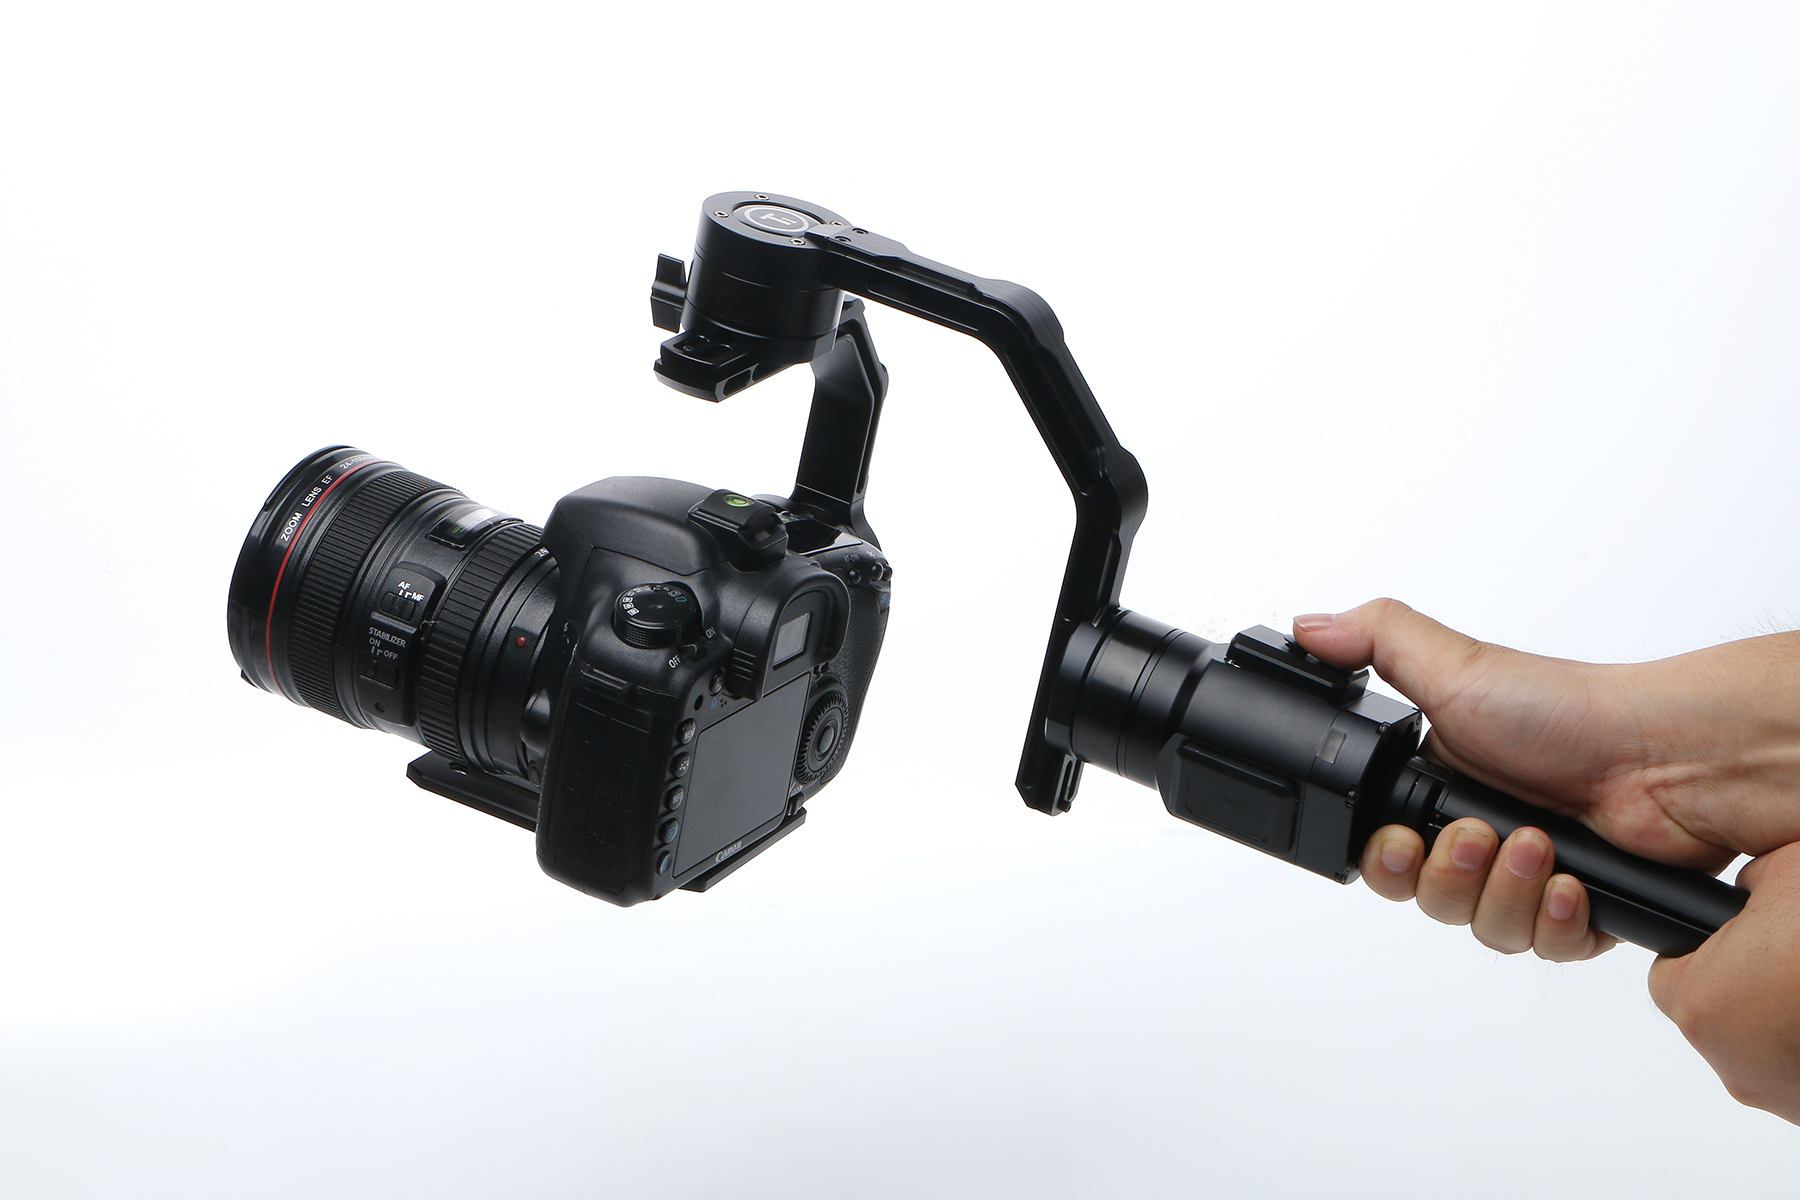 3-Axis encoder Gimbal Handheld Stabilizer for small DSLR Camera